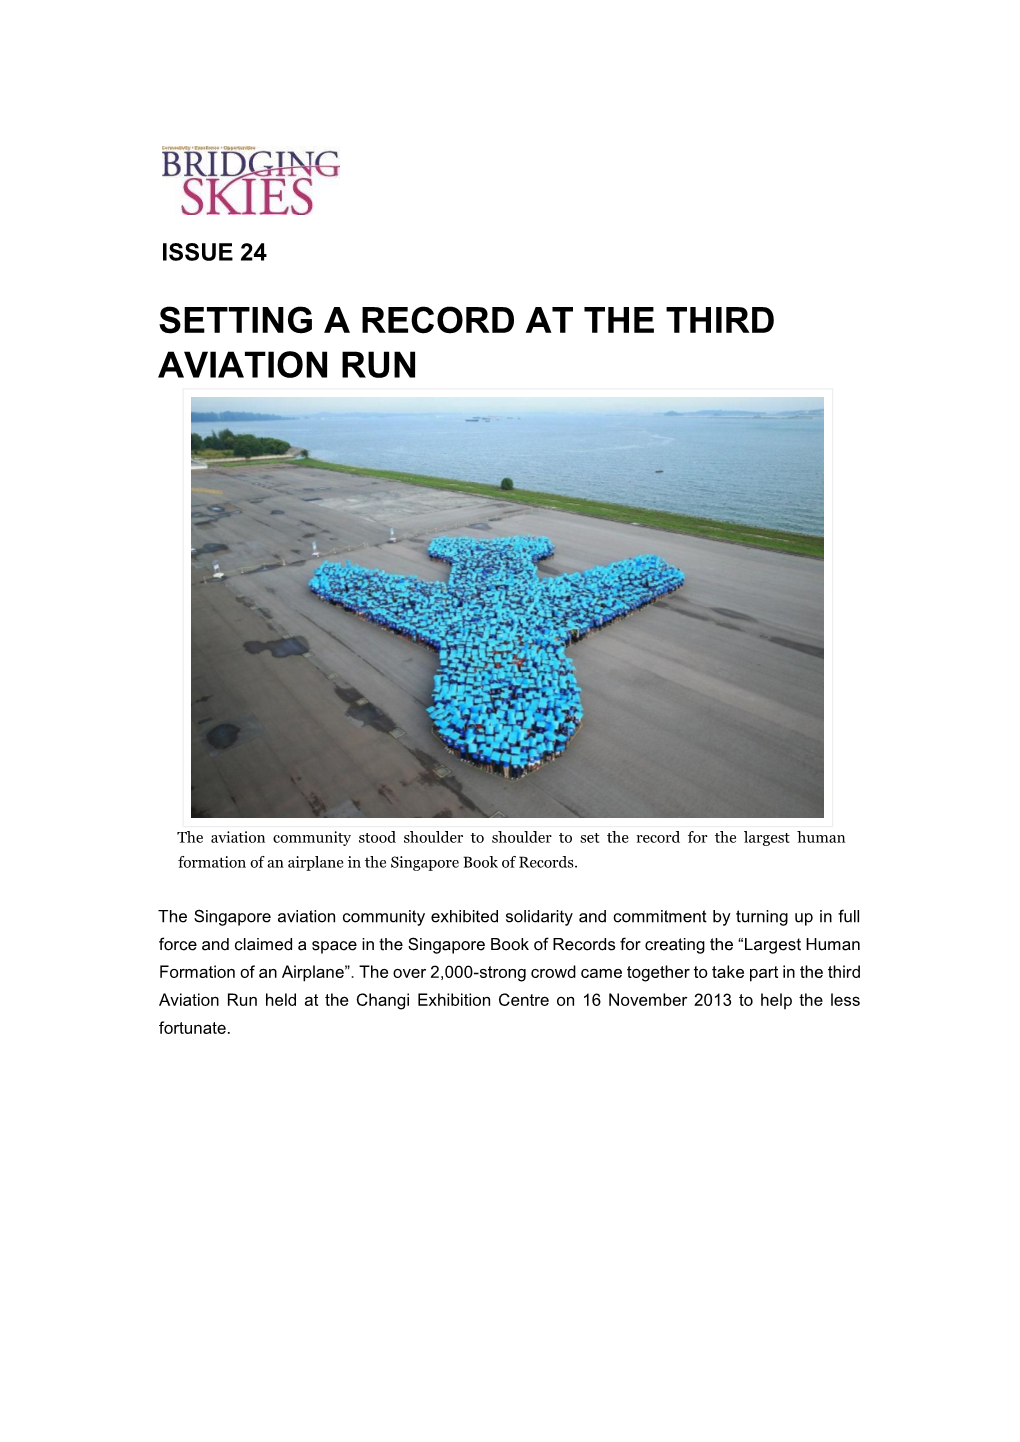 Setting a Record at the Third Aviation